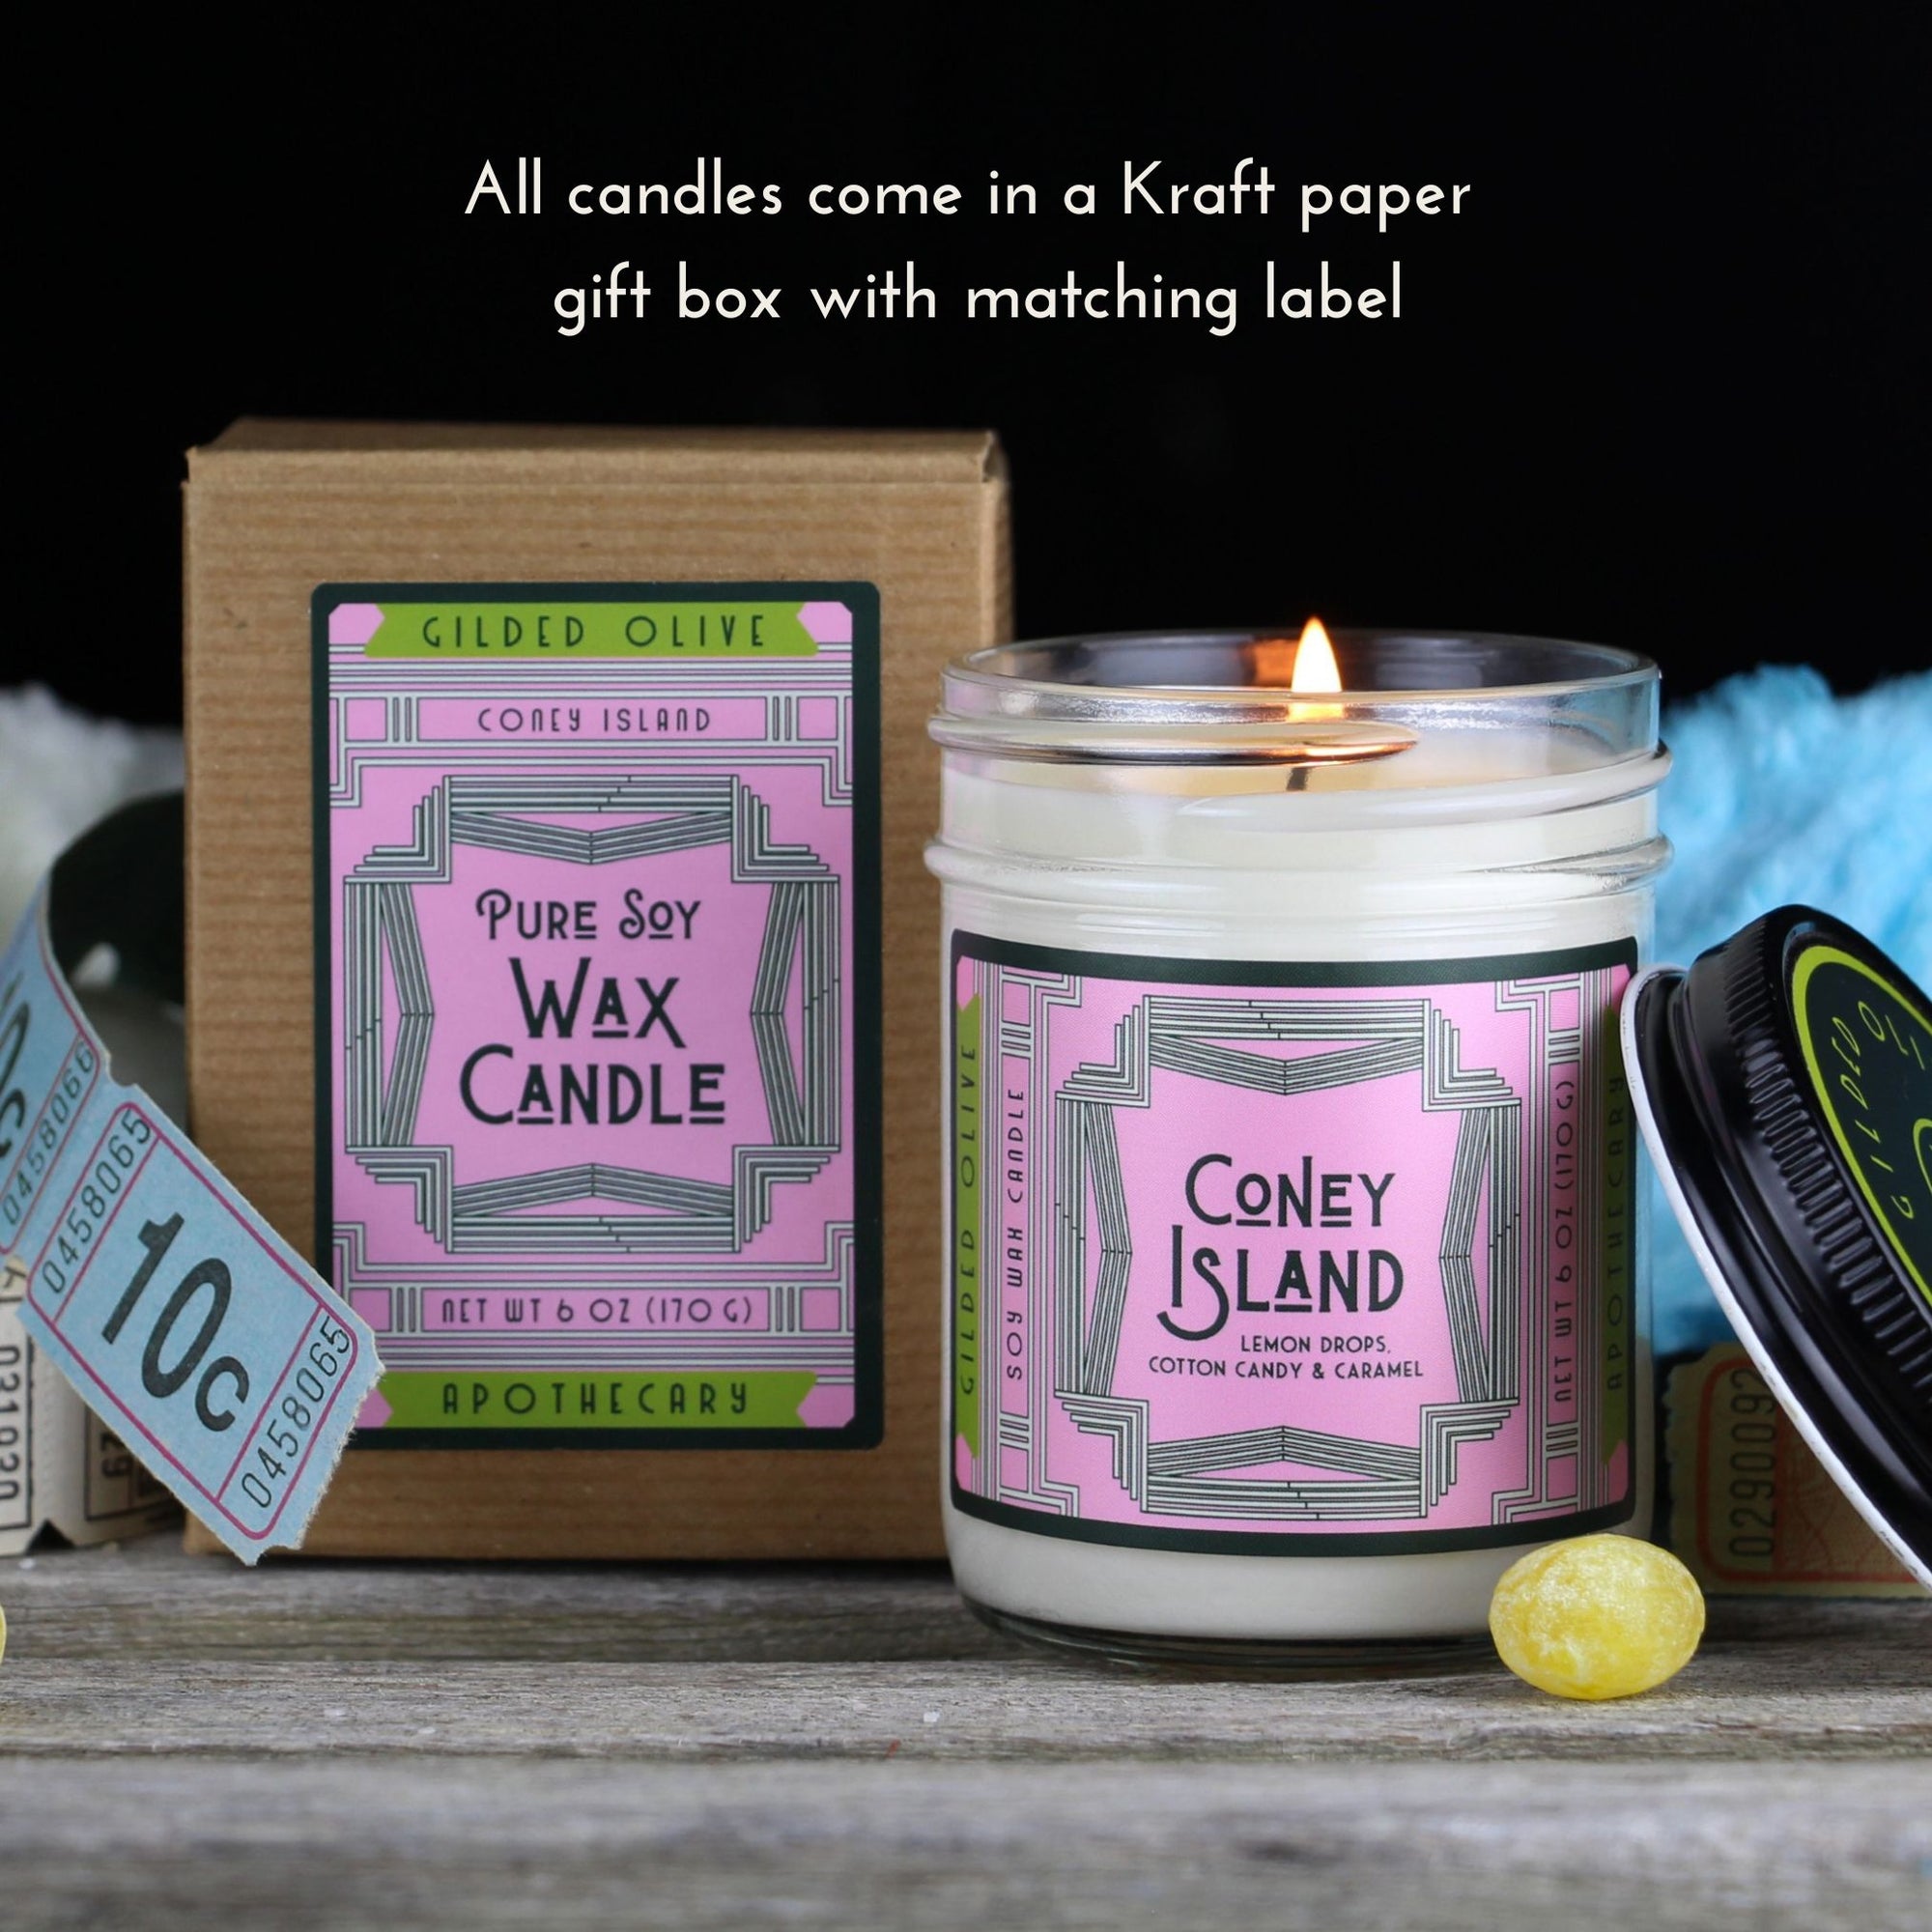 All candles come protected in a Kraft paper gift box with matching label.